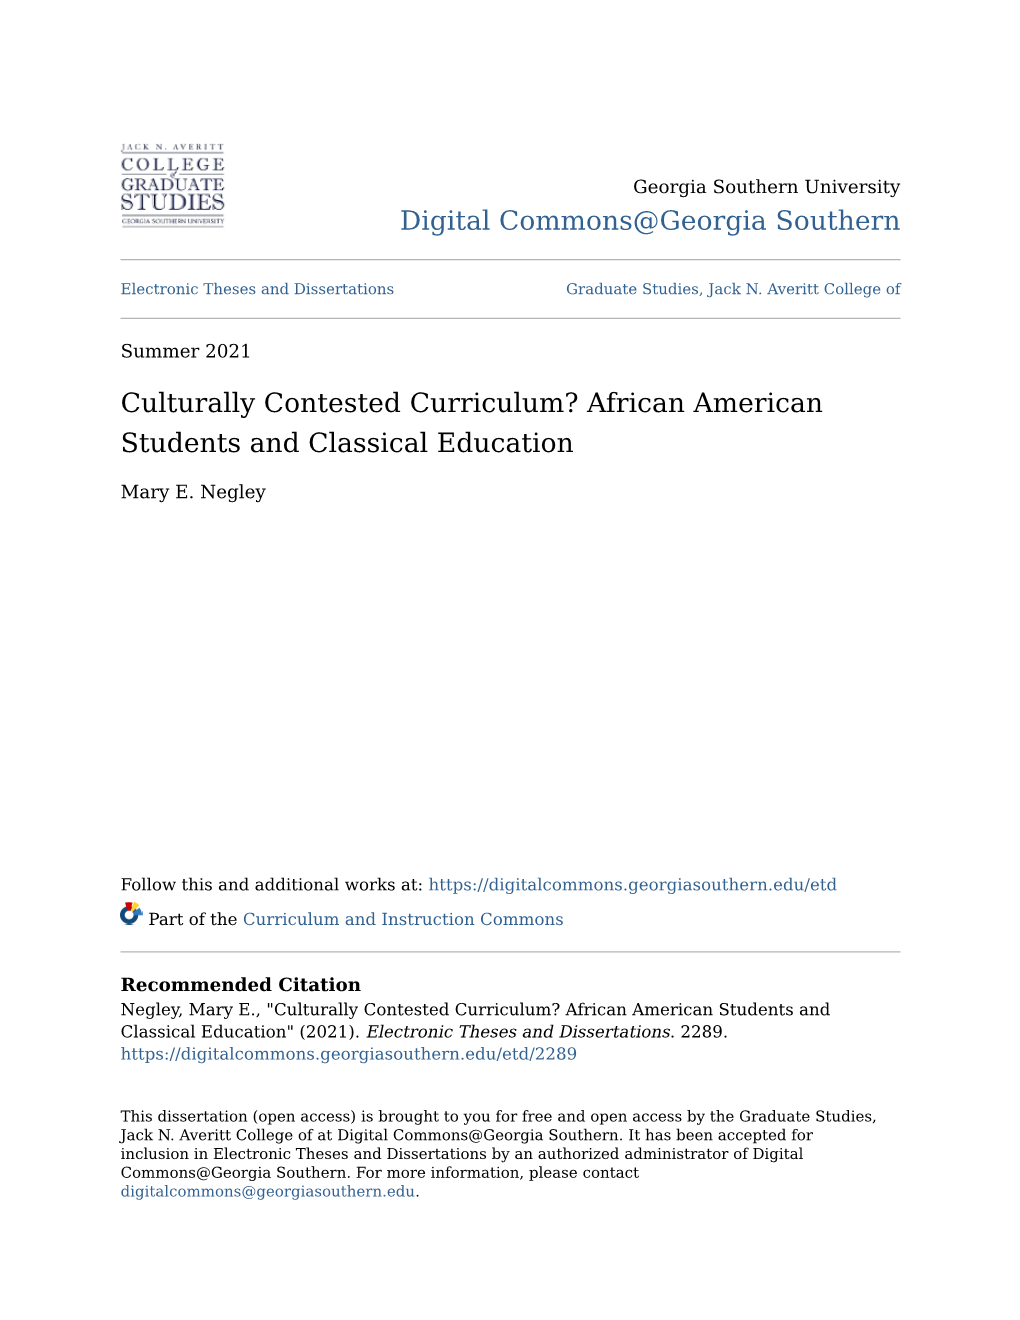 African American Students and Classical Education